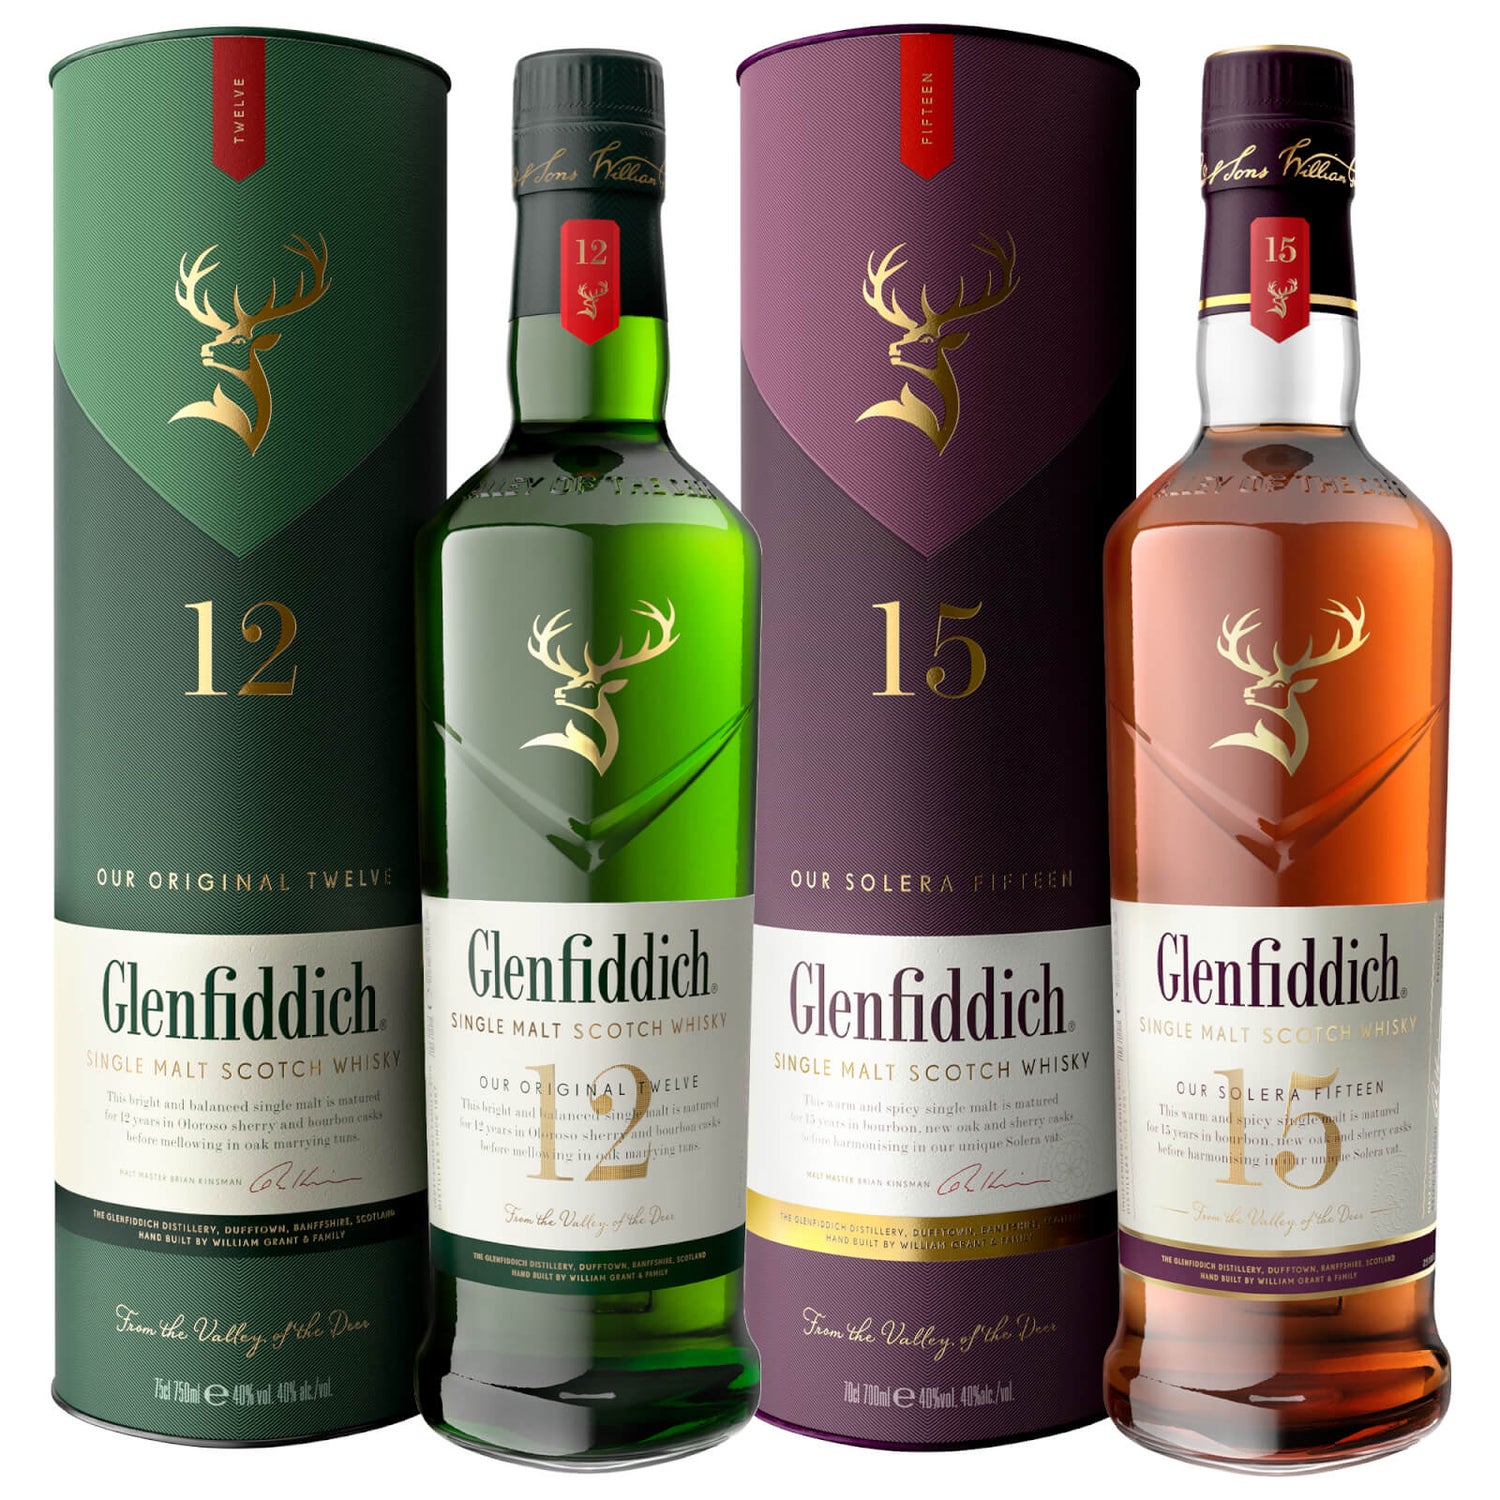 Glenfiddich 12 Year Old and 15 Year Old Single Malt Scotch Whisky Duo